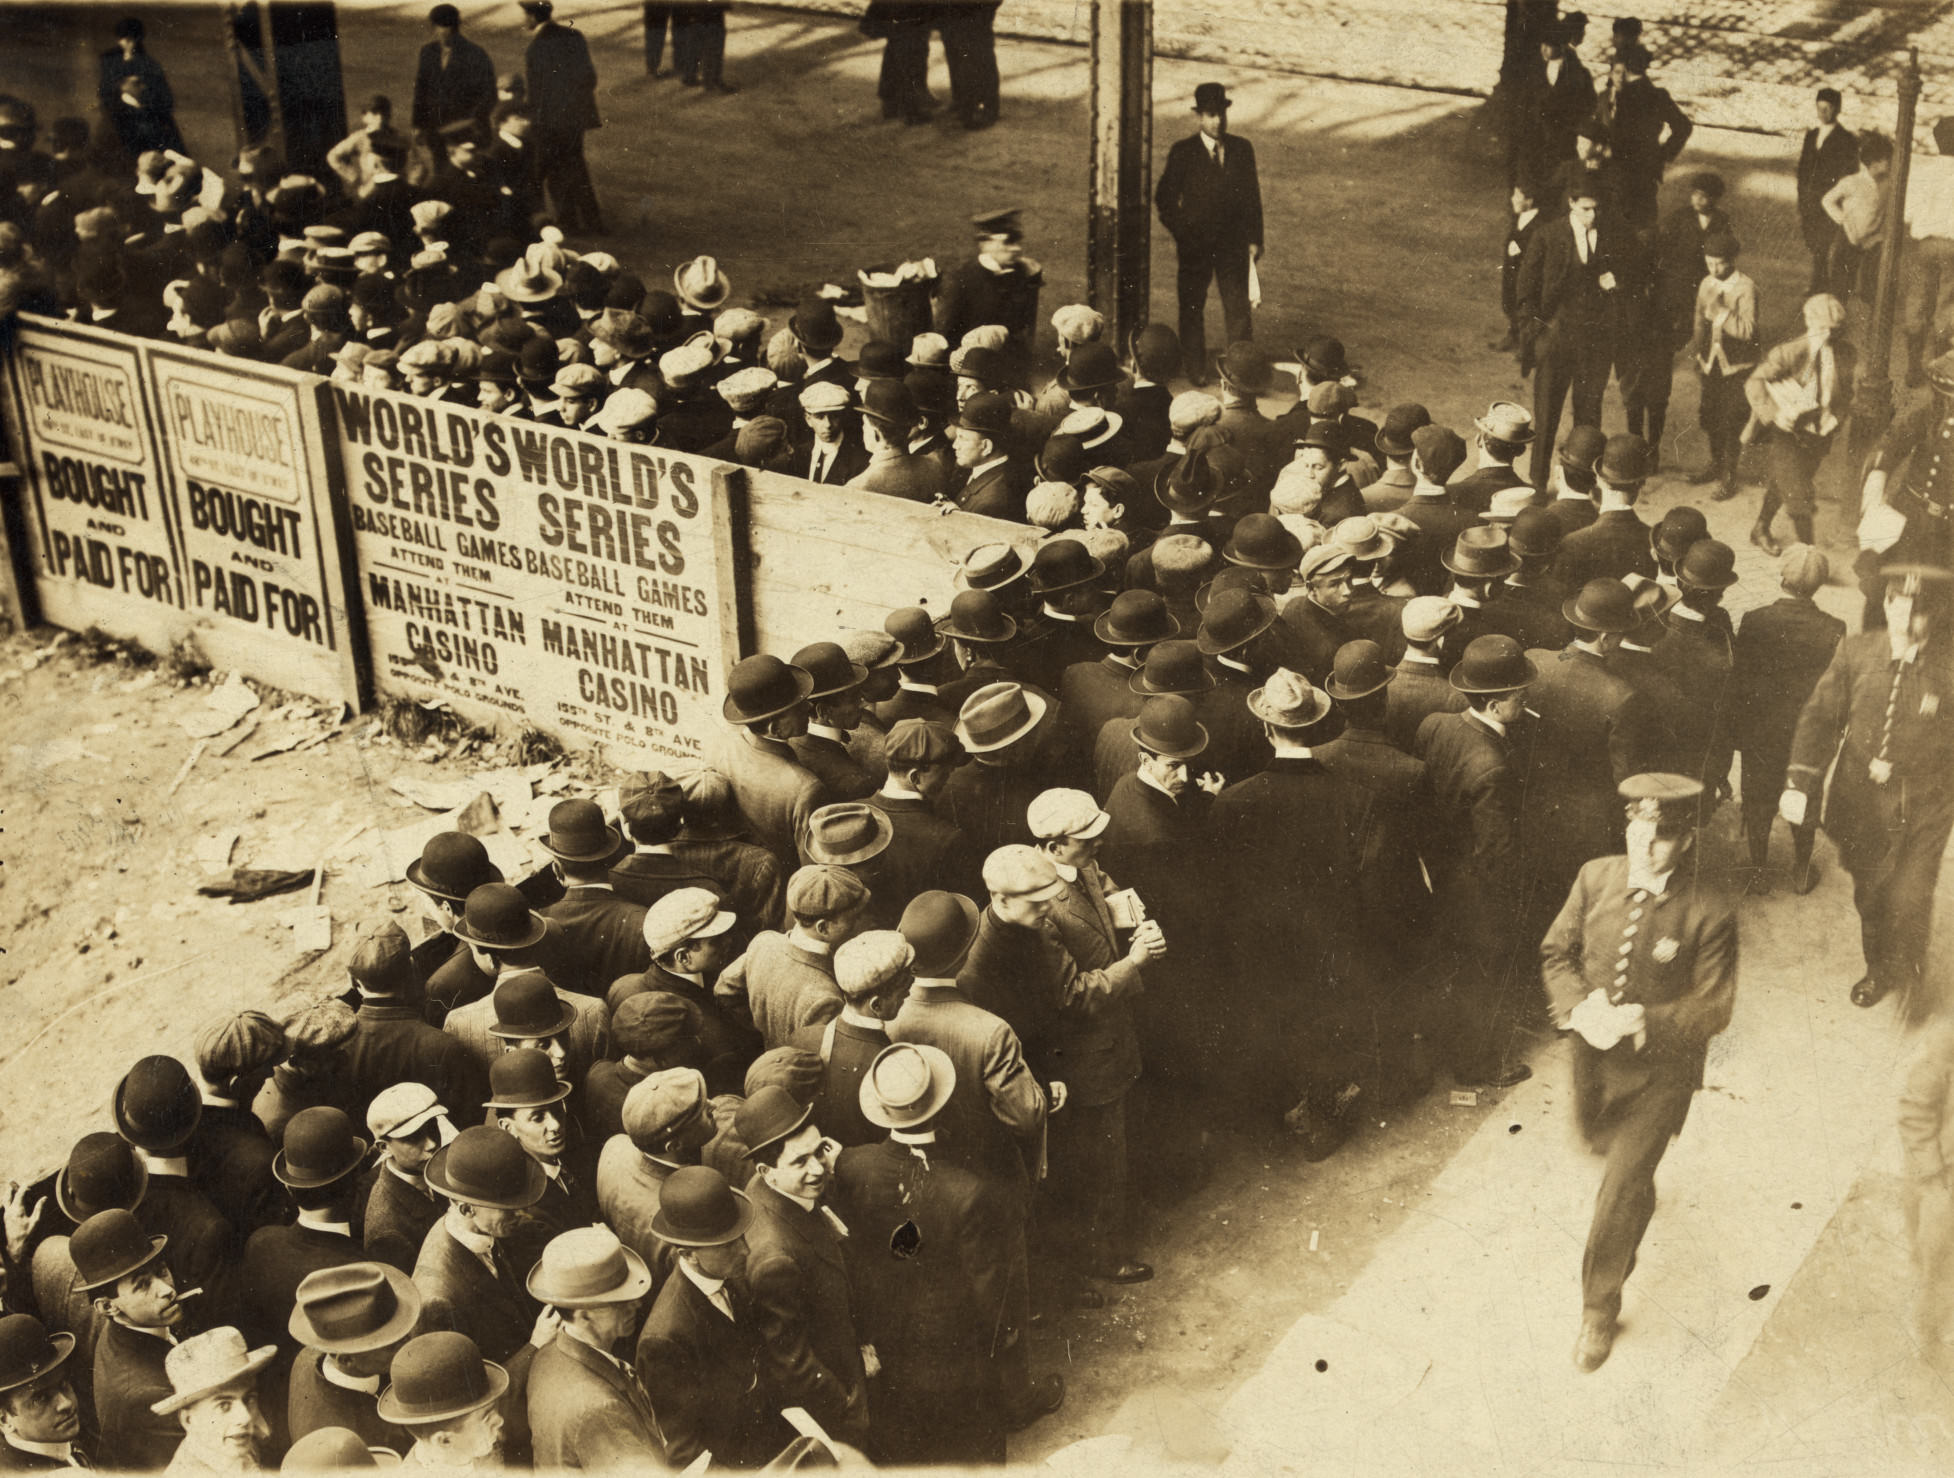 Line outside the Grounds to buy ticket, 1911